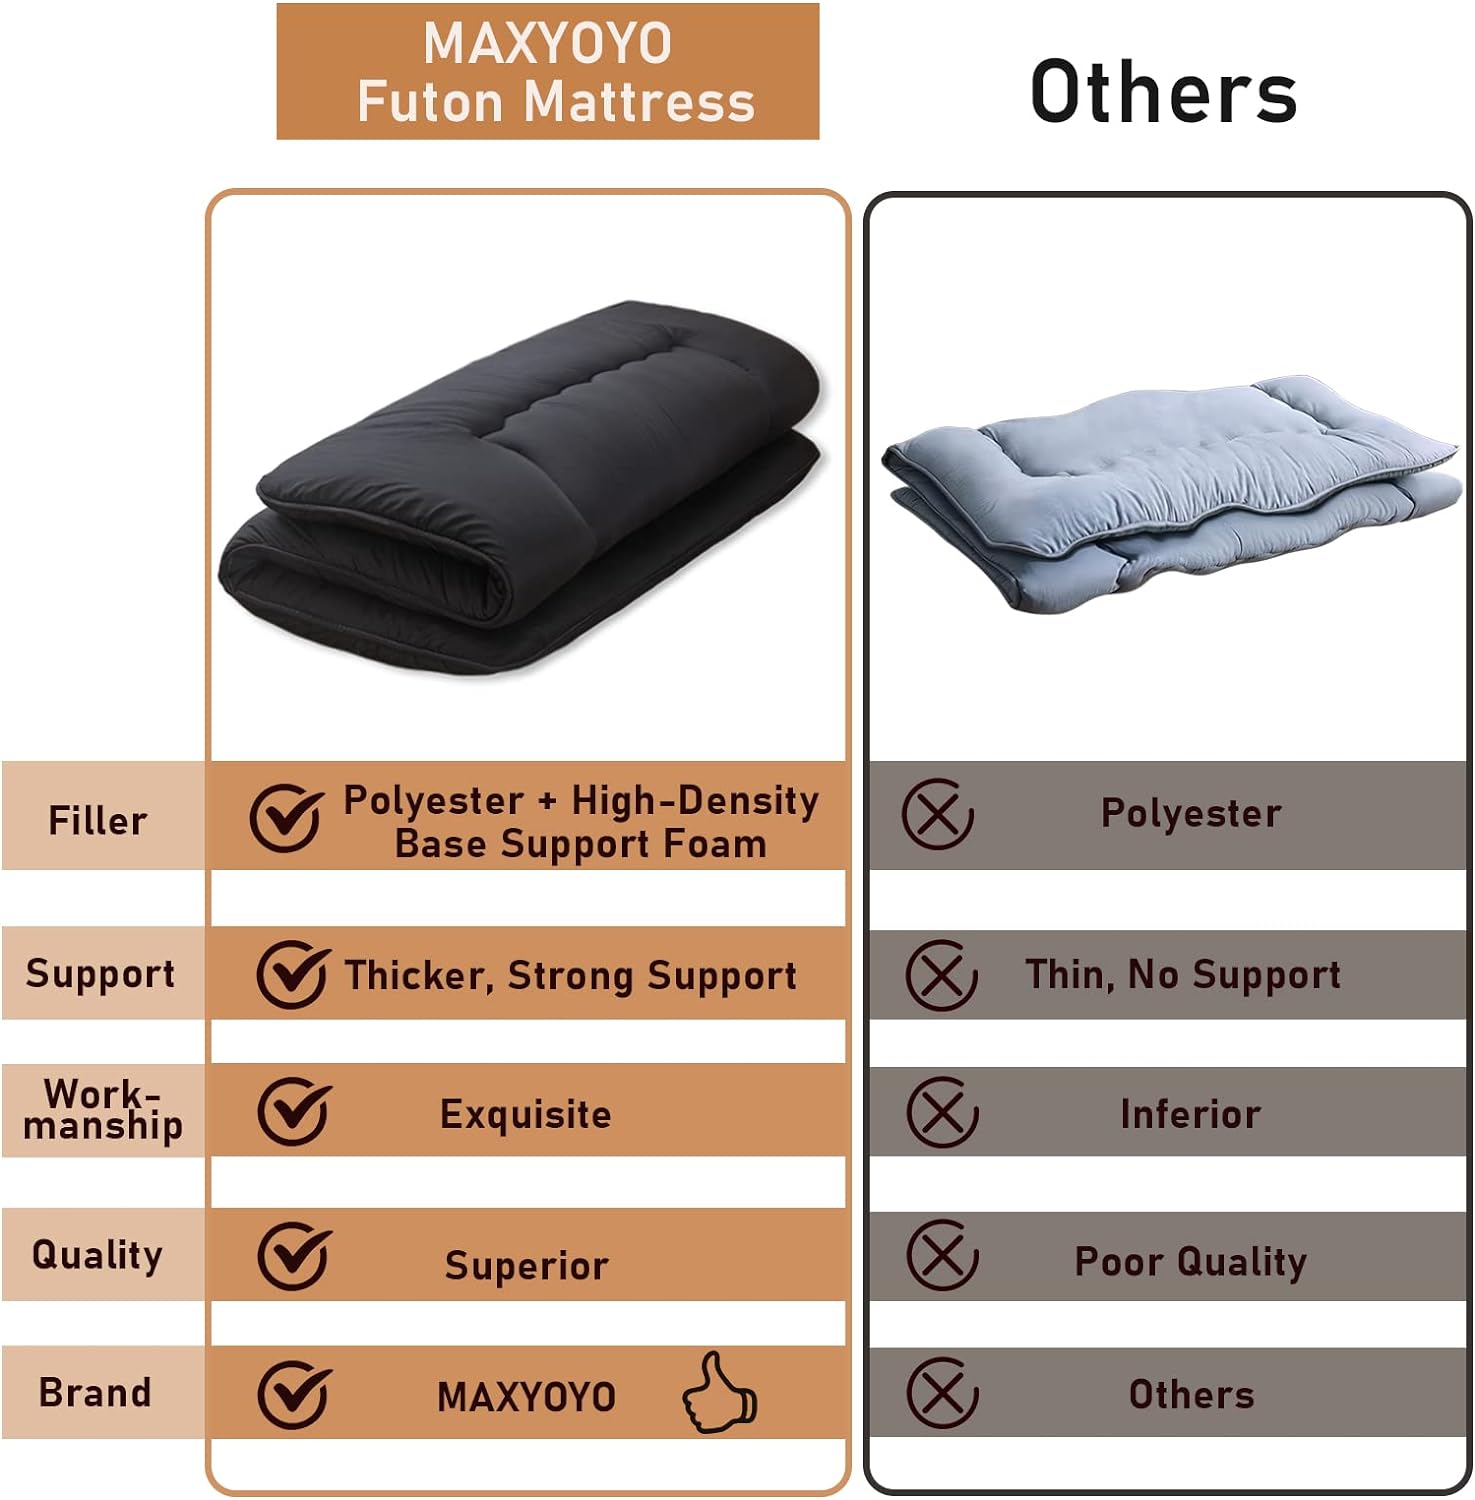 MAXYOYO Japanese Floor Mattress compare to others